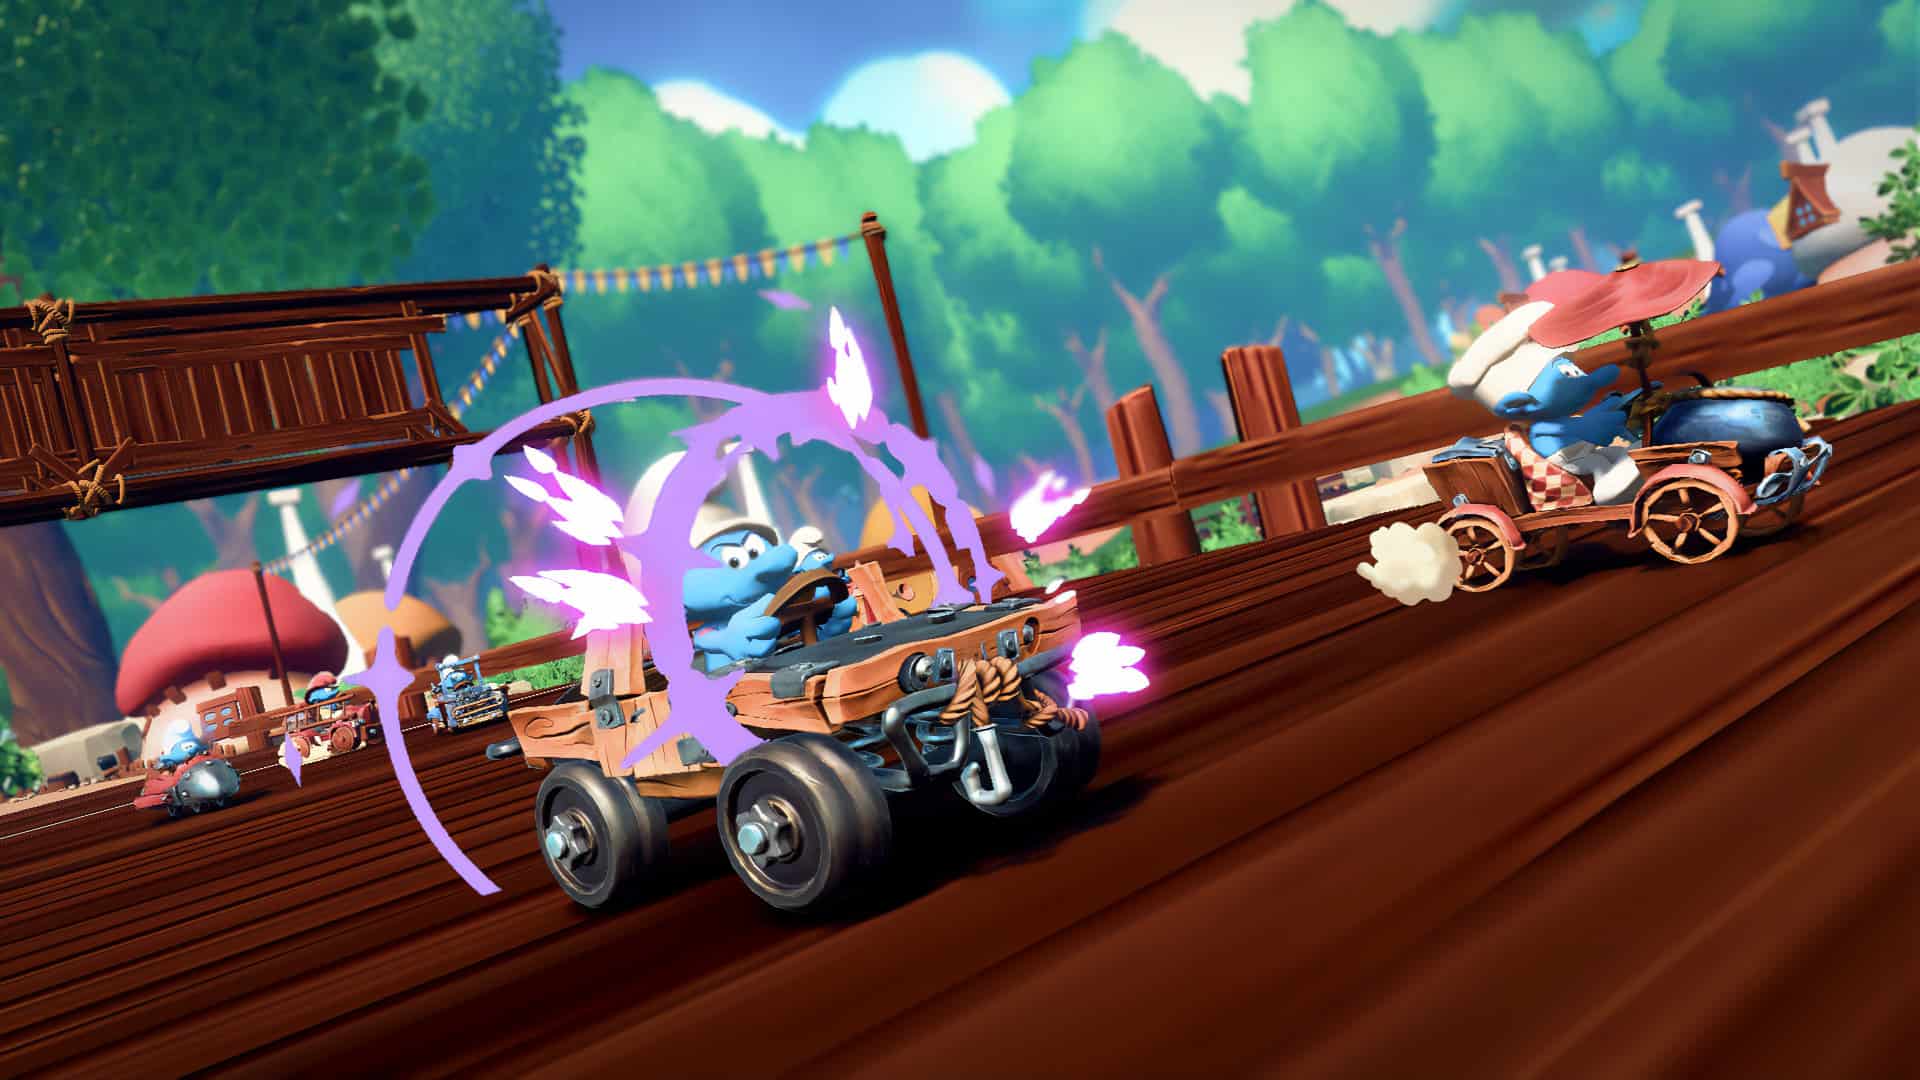 Why Smurfs Kart could be an ideal first racing game